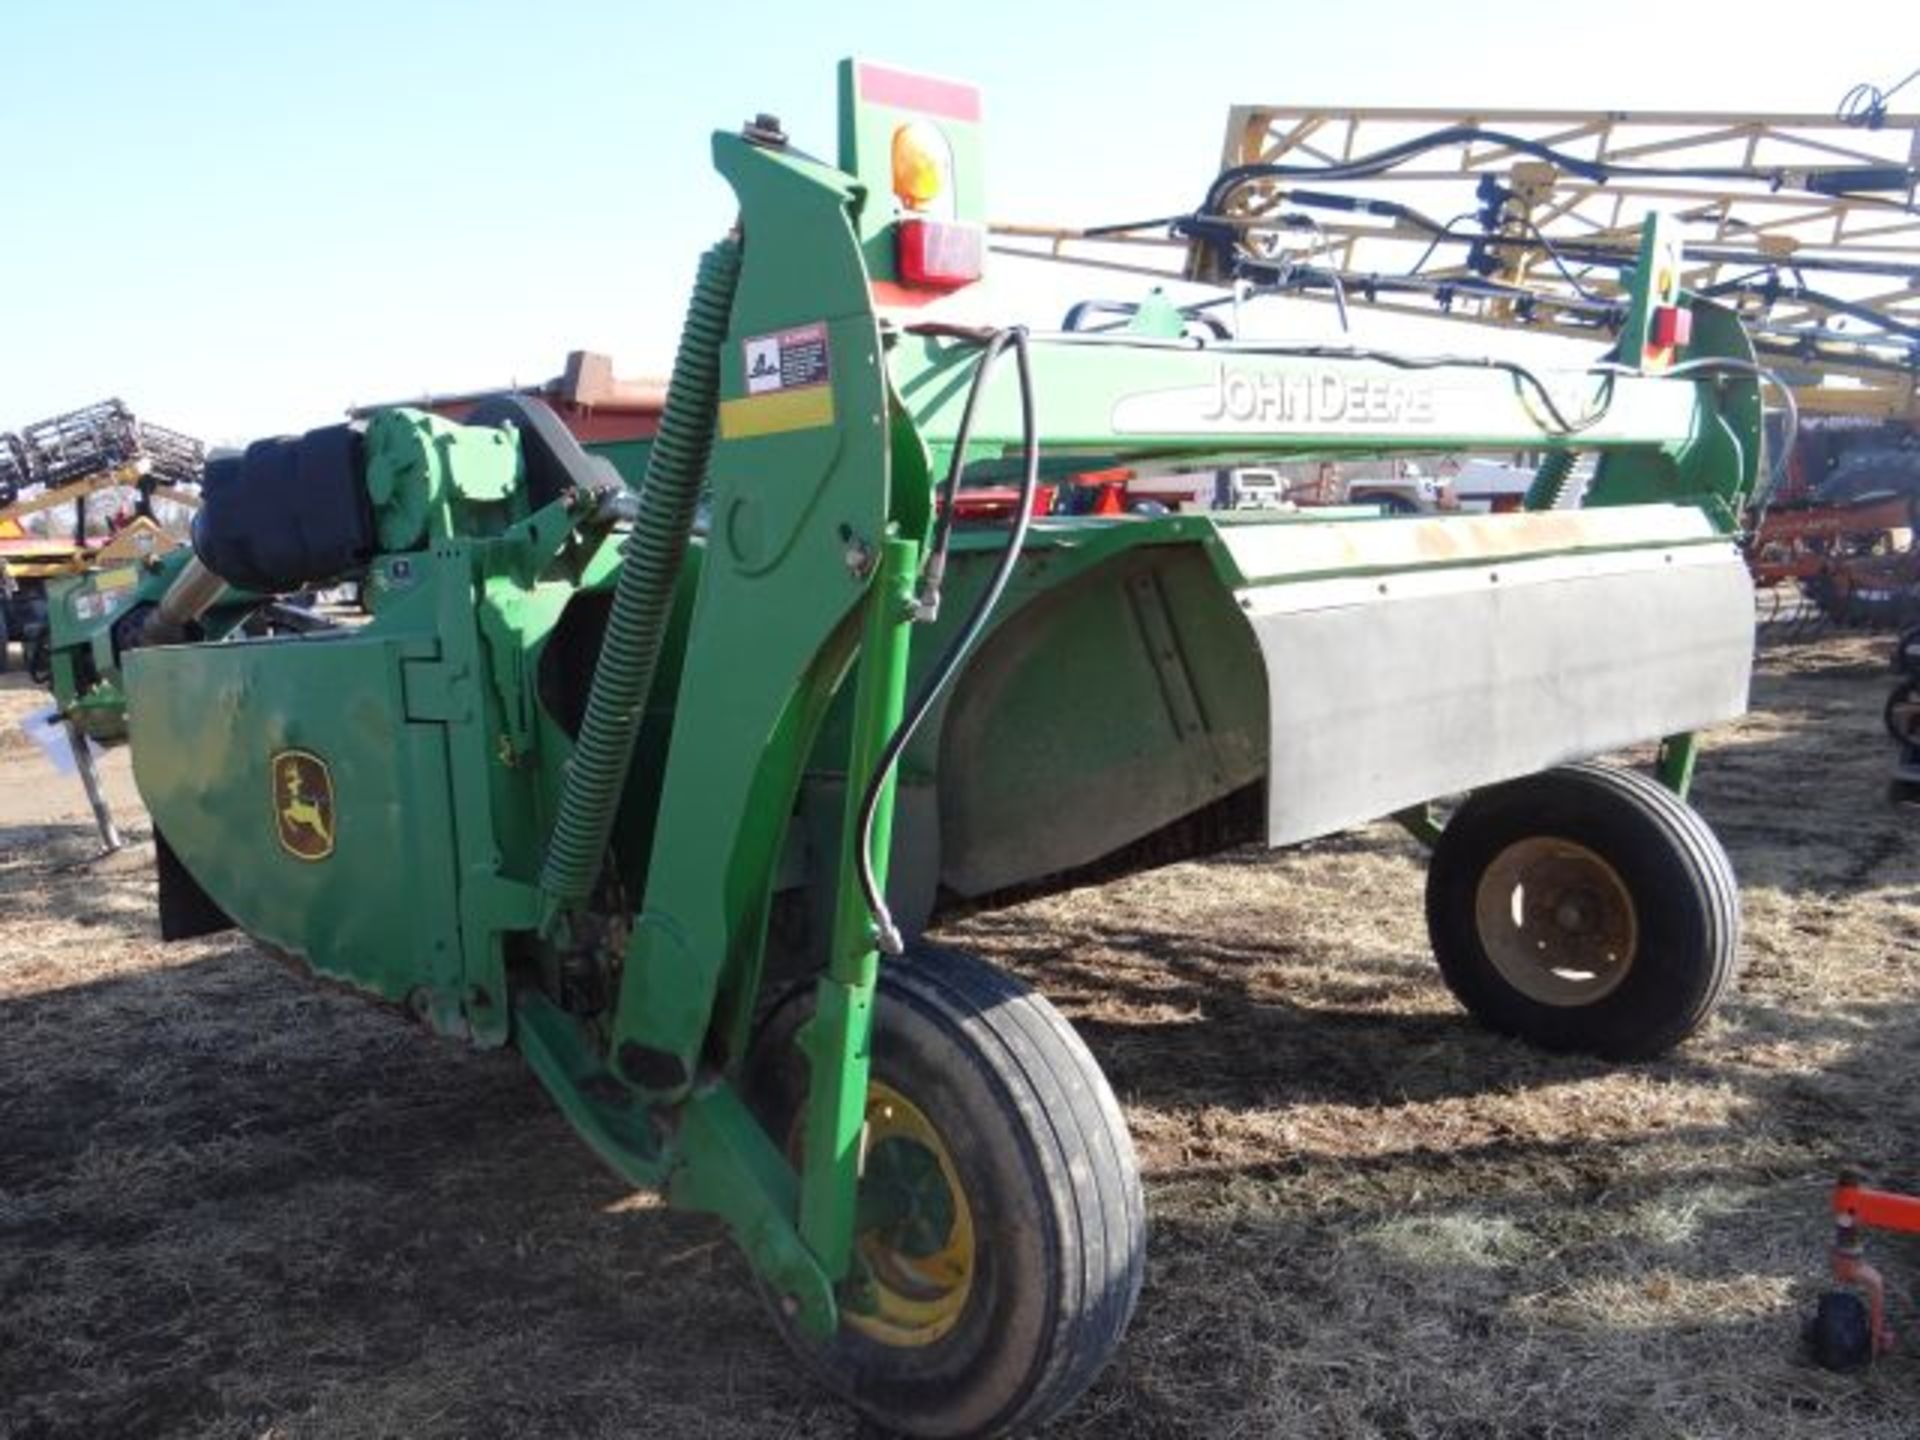 JD 530 MoCo, 2007 #65317, MOCO Side pull:9'9 cut, impeller conditioner, clevis hitch, single CV